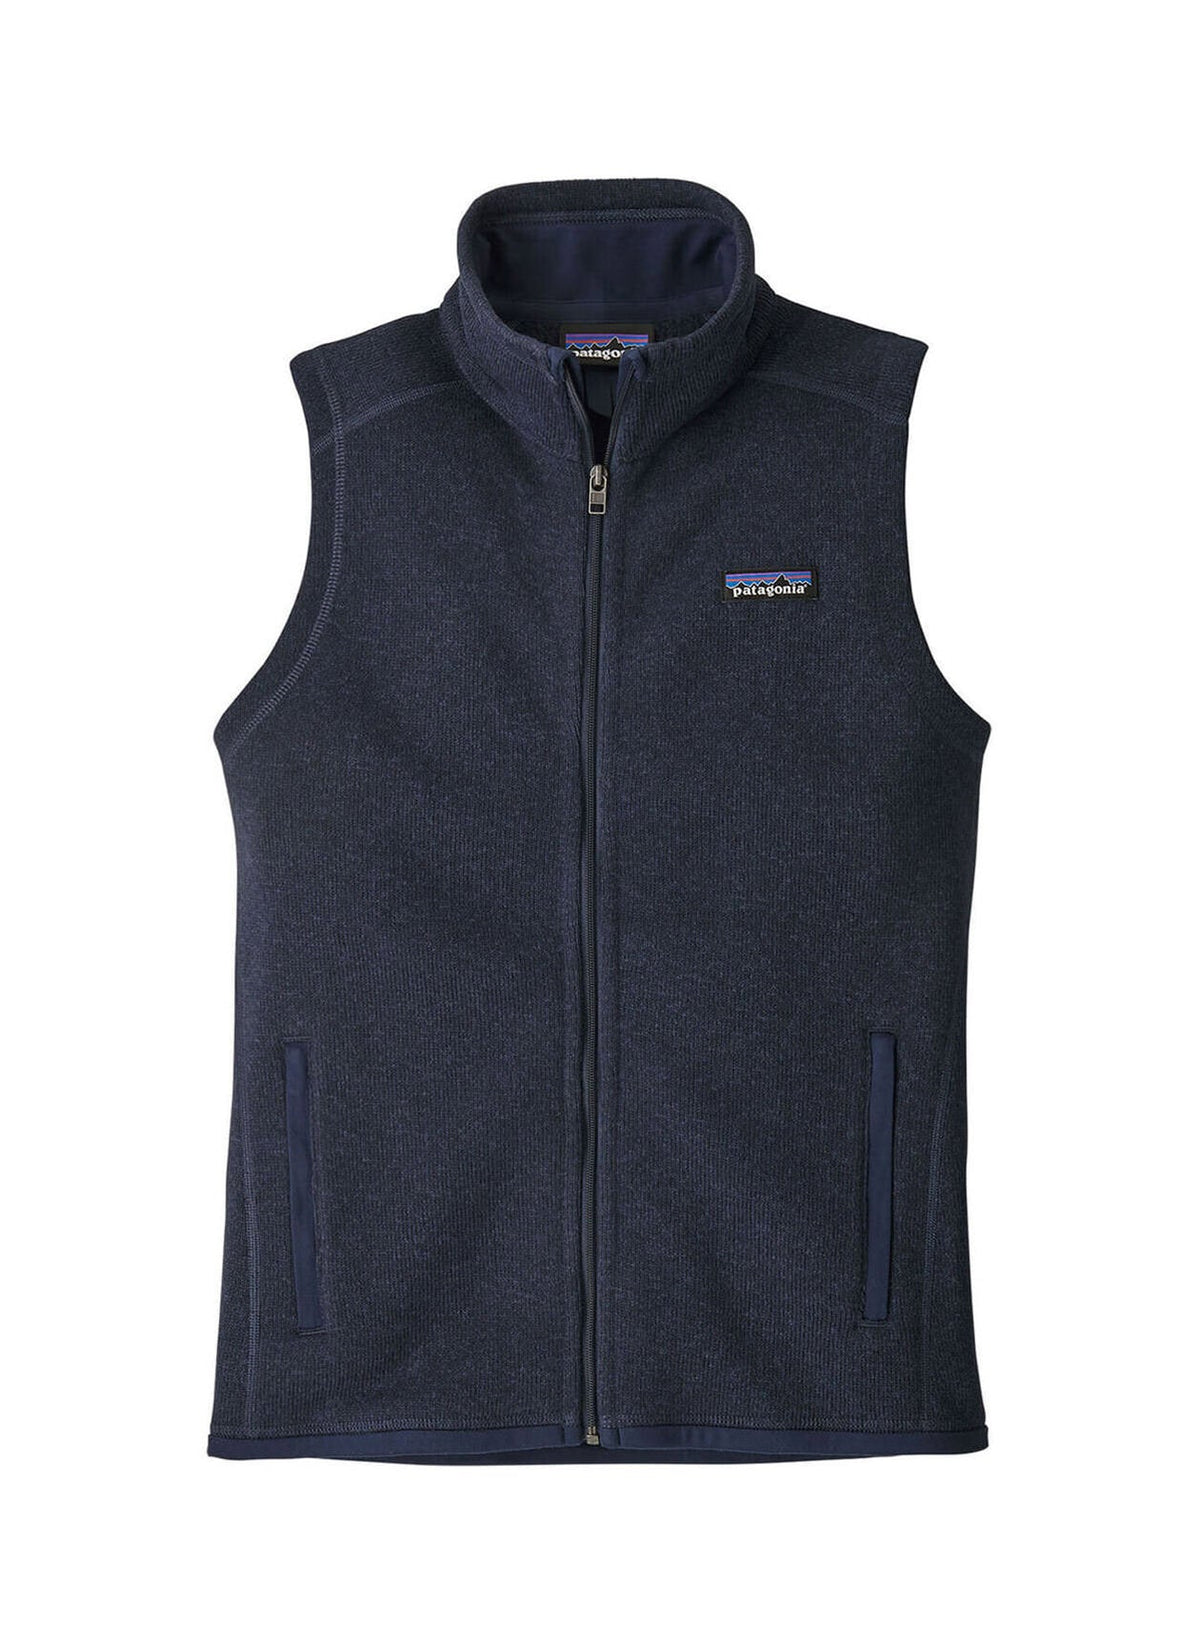 Patagonia Women's Better Sweater Vest